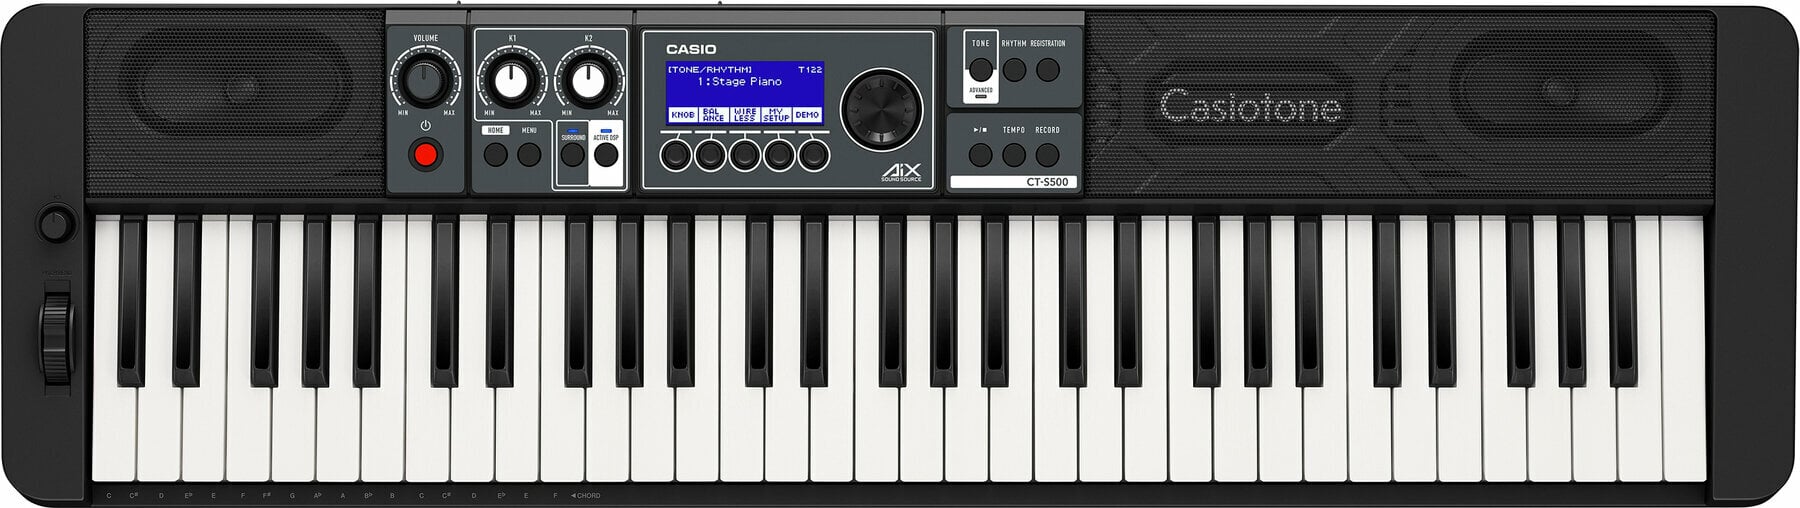 Keyboard with Touch Response Casio CT-S500